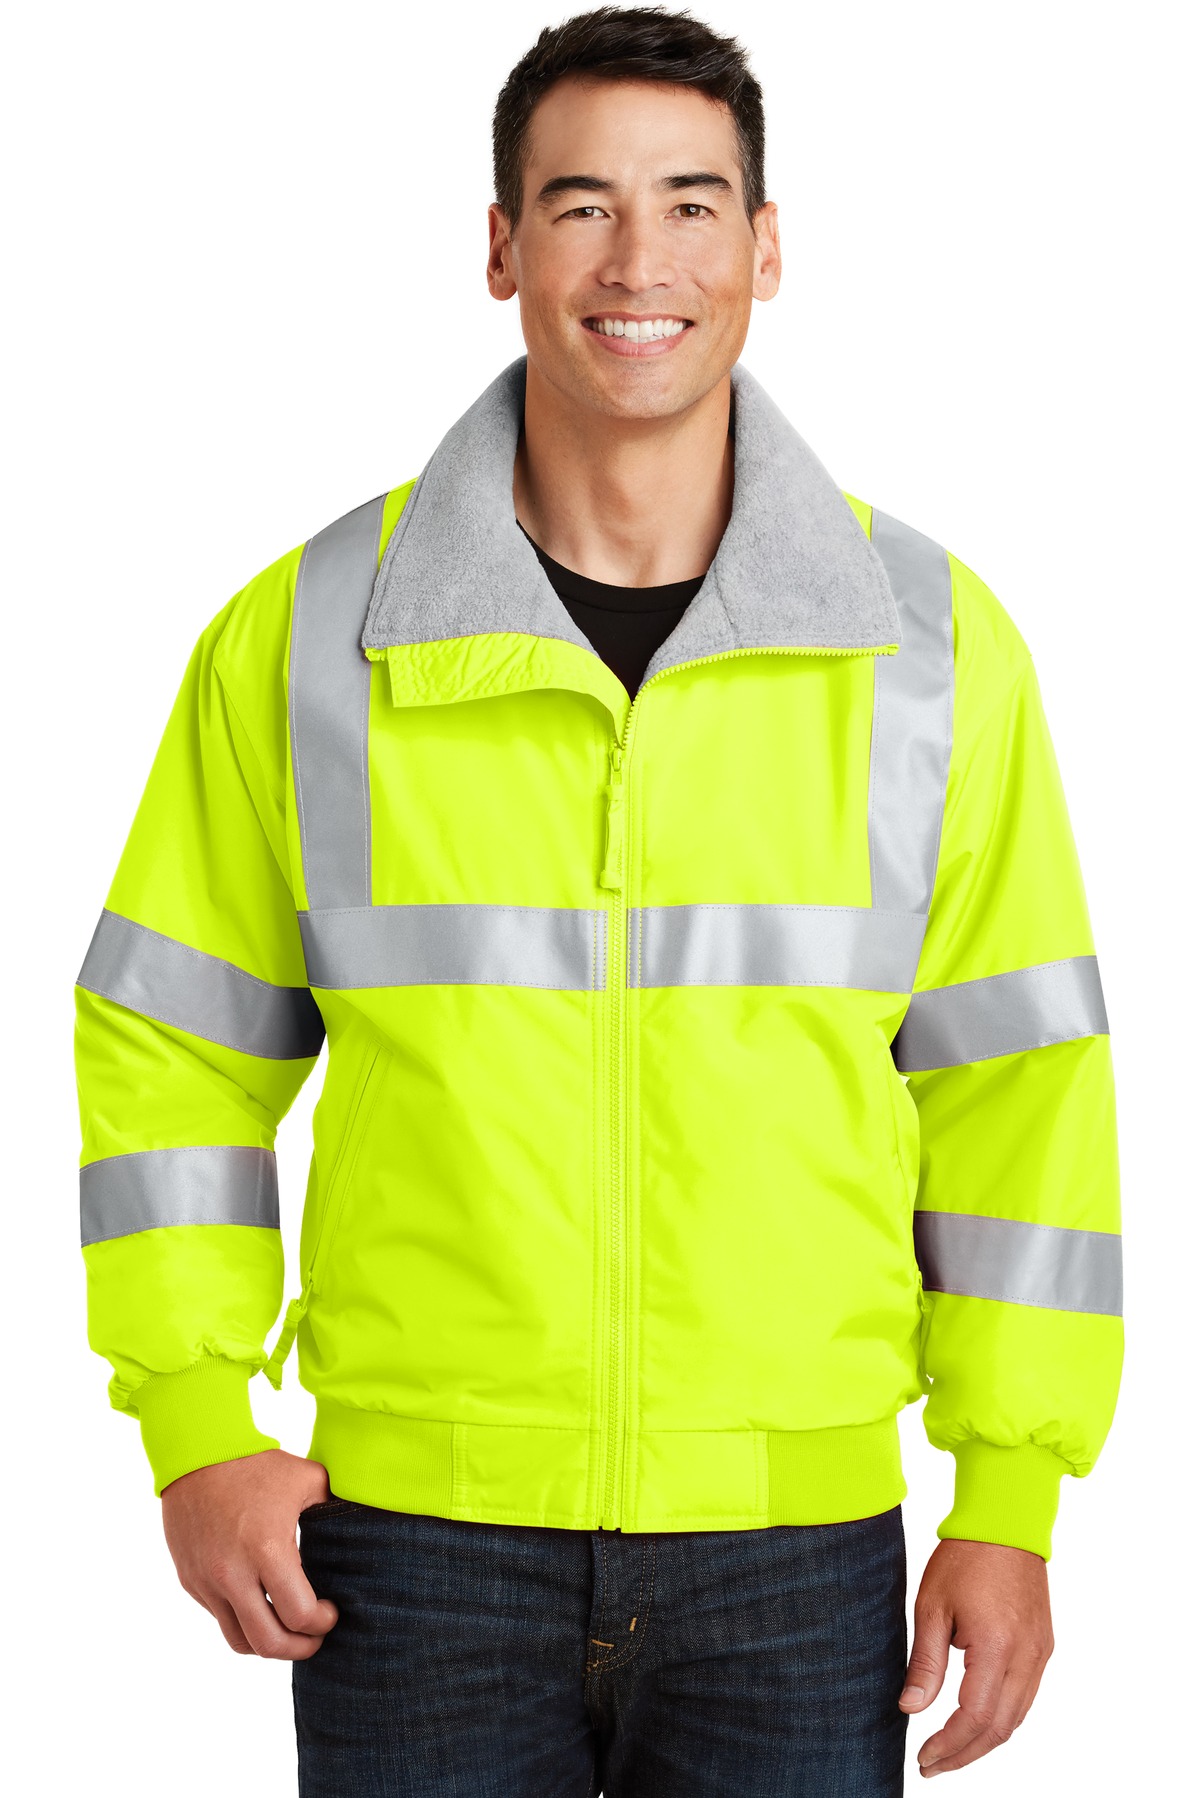 Port Authority Hospitality Outerwear &Workwear ® Enhanced Visibility Challenger Jacket with Reflective Taping.-Port Authority